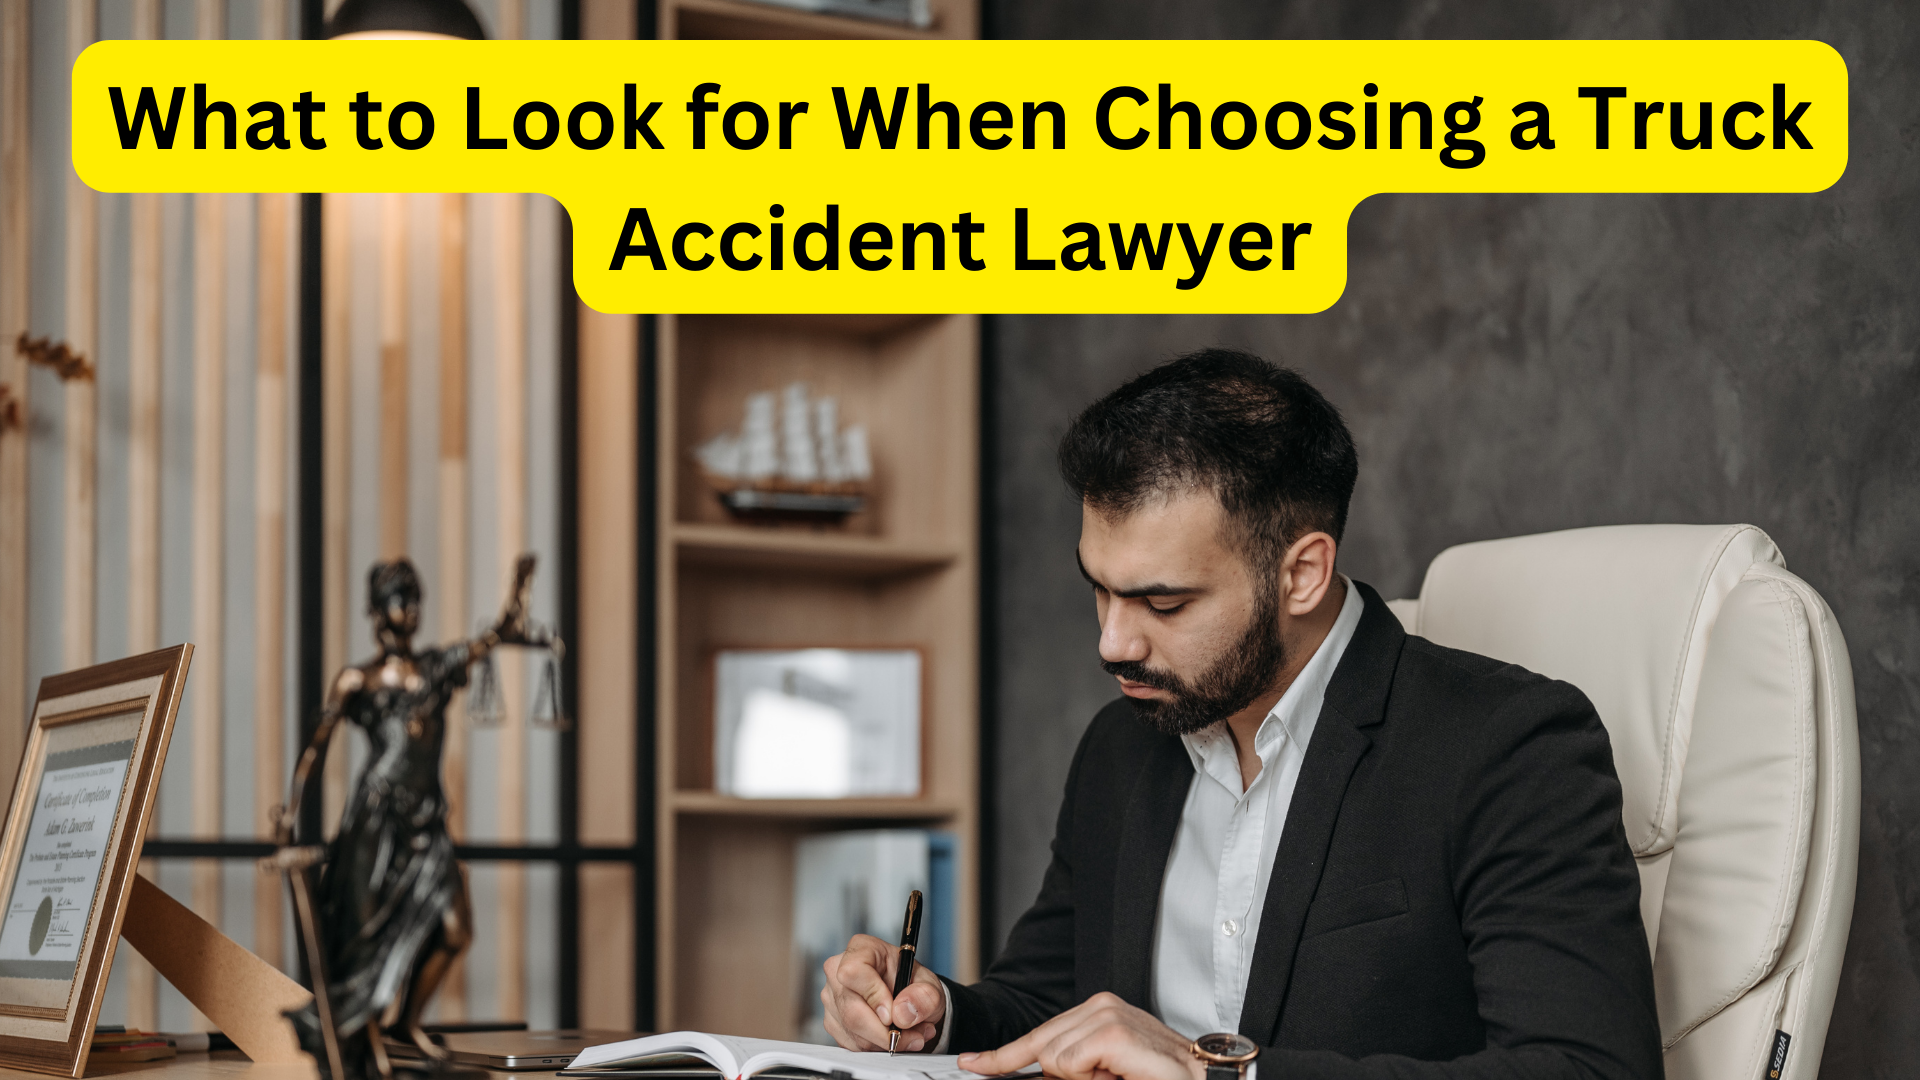 What to Look for When Choosing a Truck Accident Lawyer